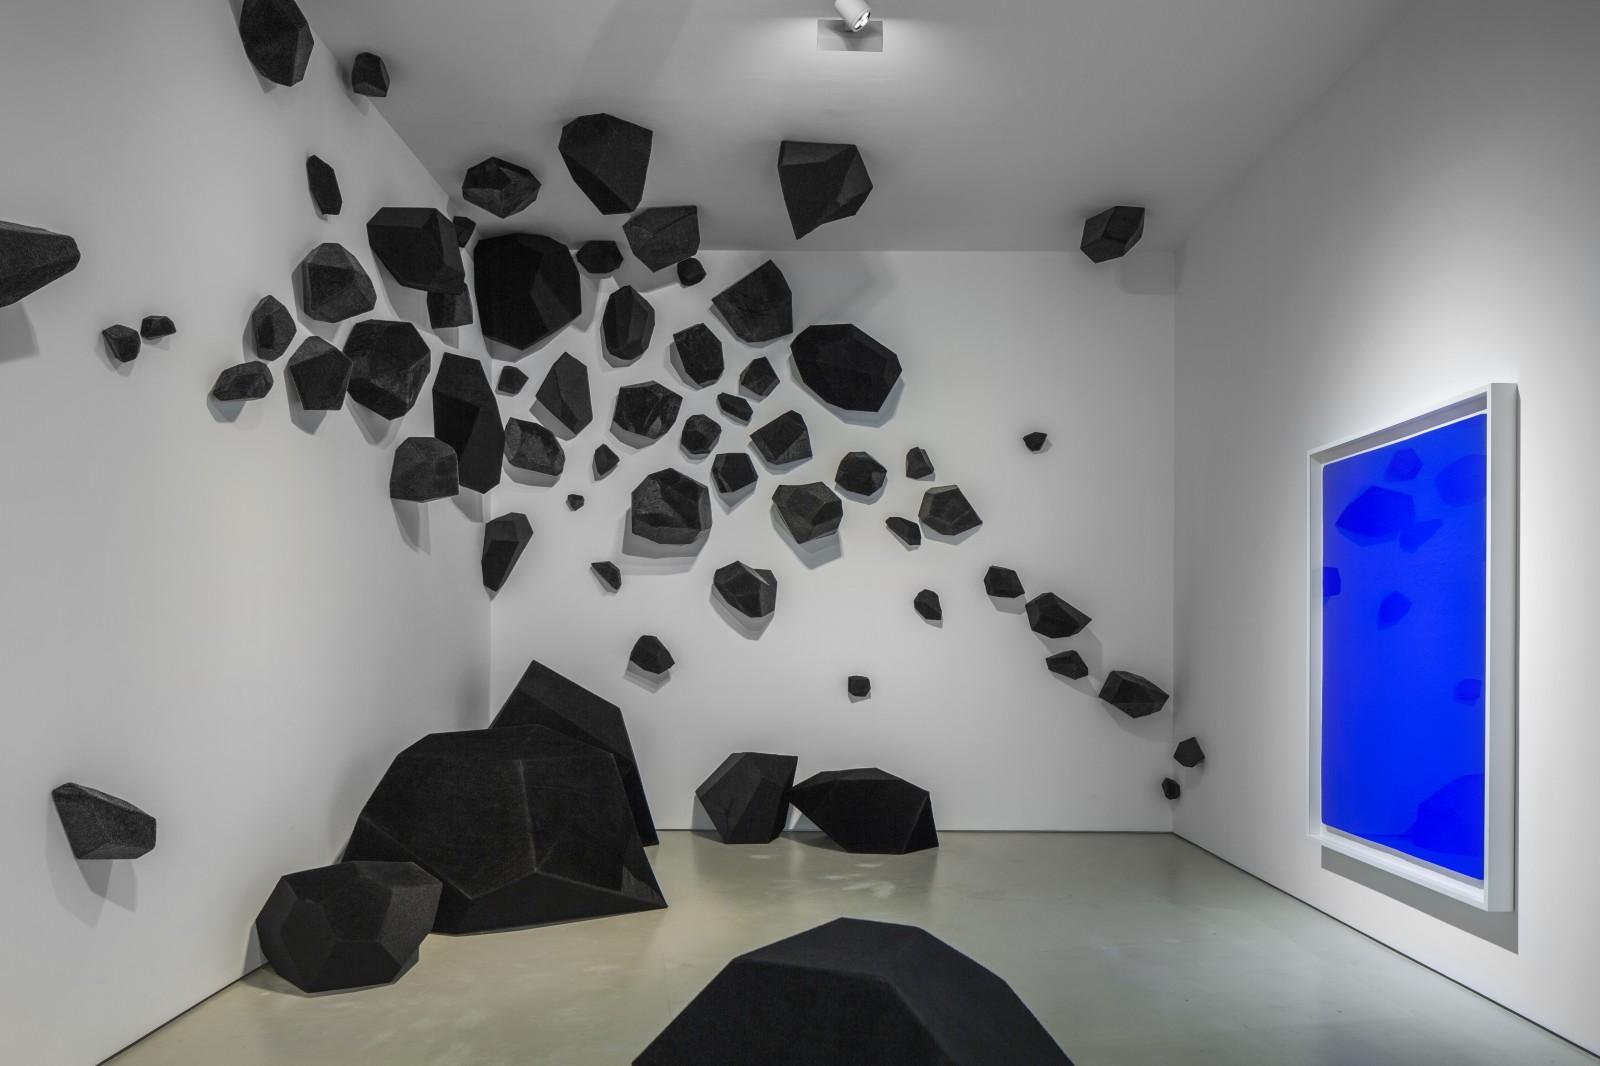 View of the exhibition "The Challenging Souls - Yves Klein, Lee Ufan, Ding Yi"